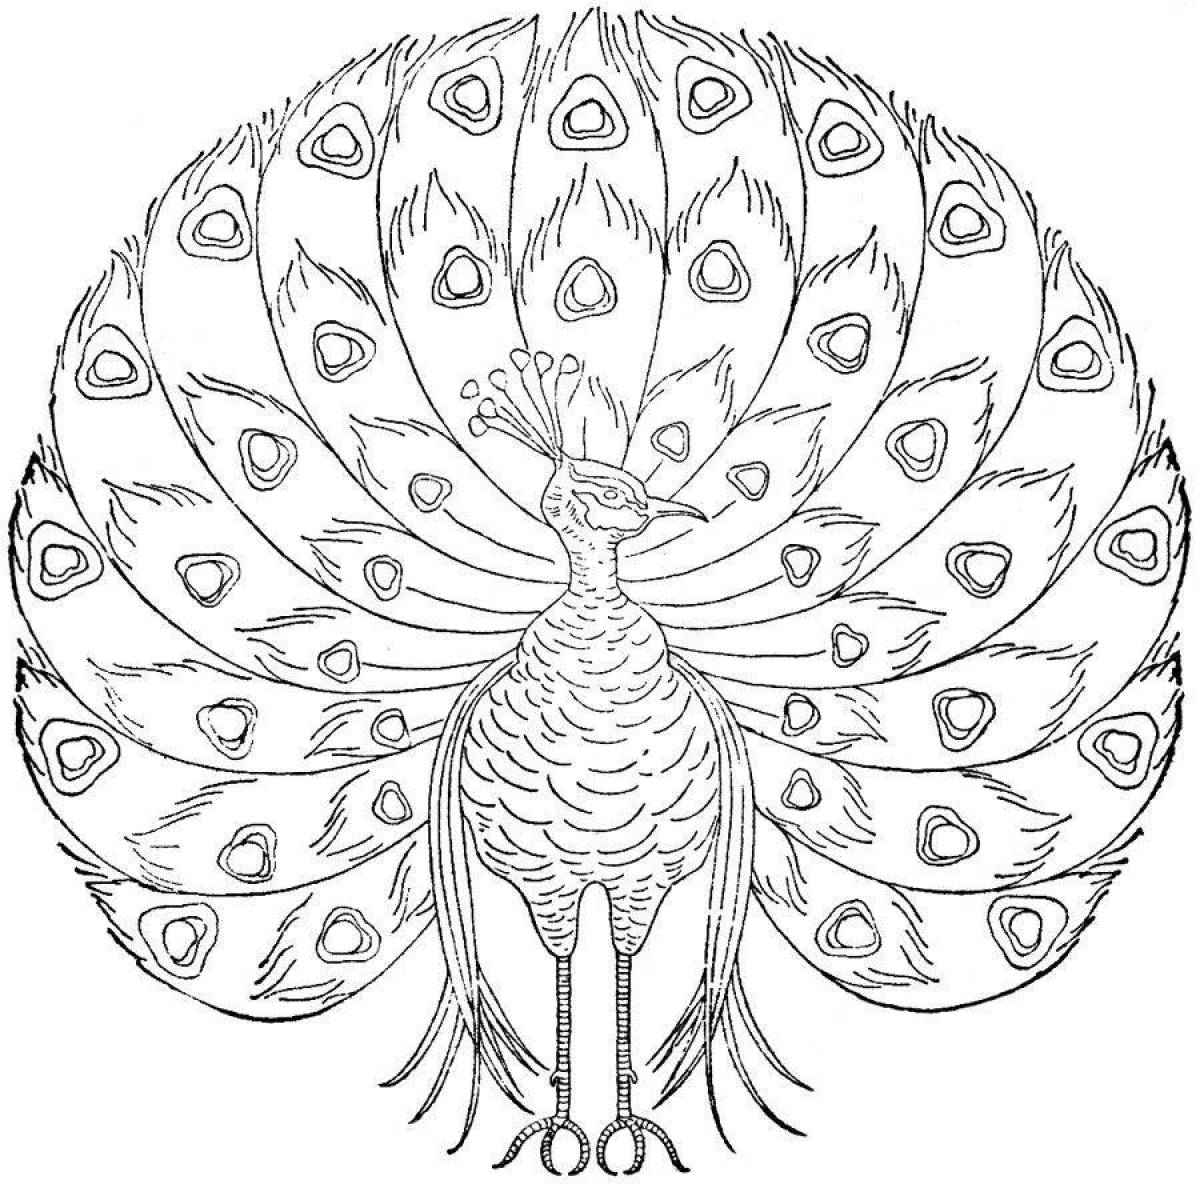 Shining peacock coloring book for kids